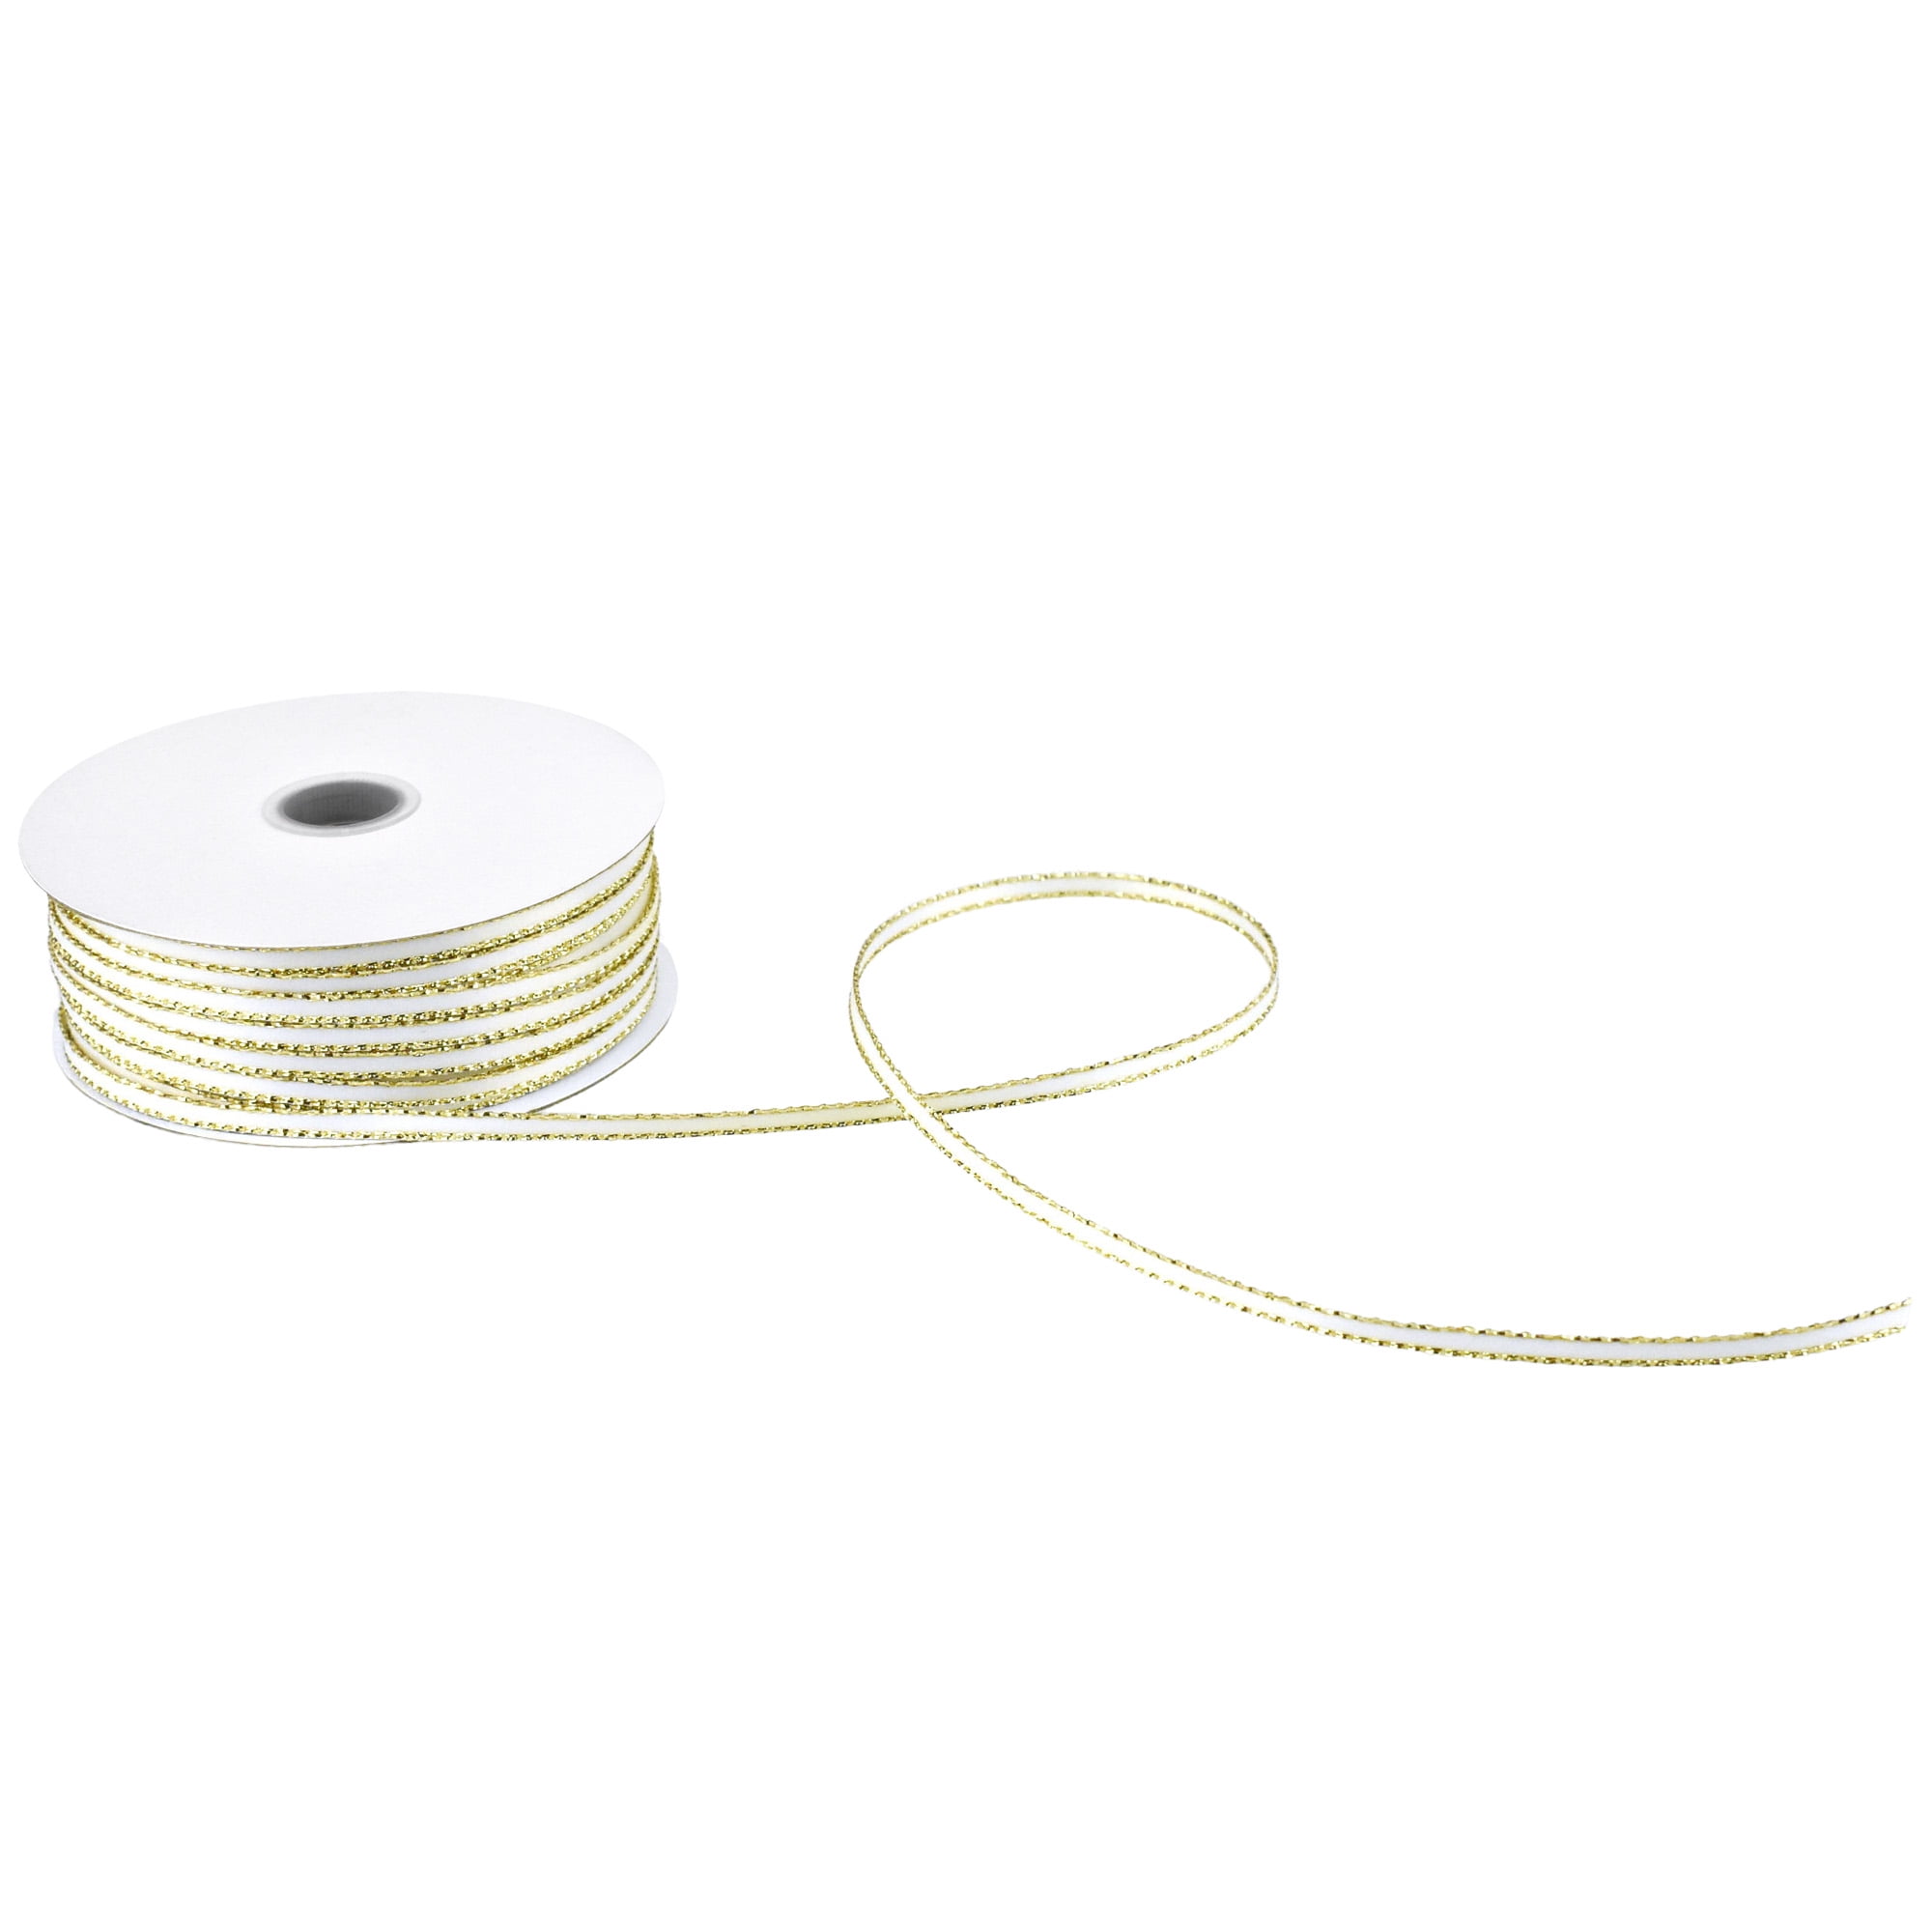 Double Faced Gold Trim Satin Ribbon, White, 1/8-Inch, 50-Yard 